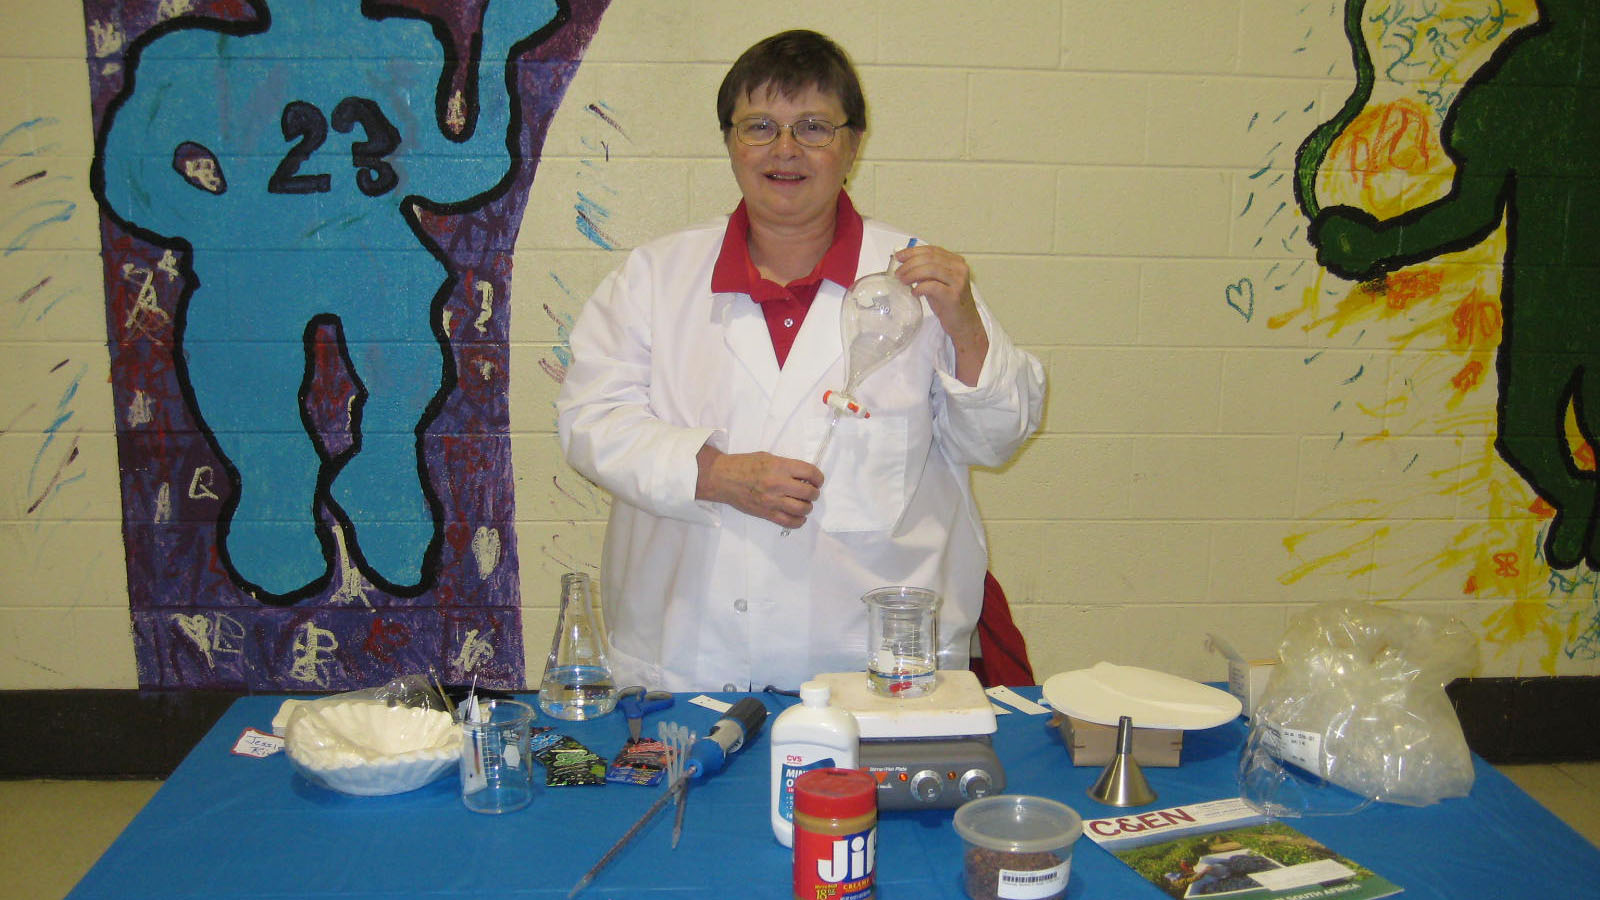 Jessie Rivers stands behind a table at a school career fair, conducting an experiment.